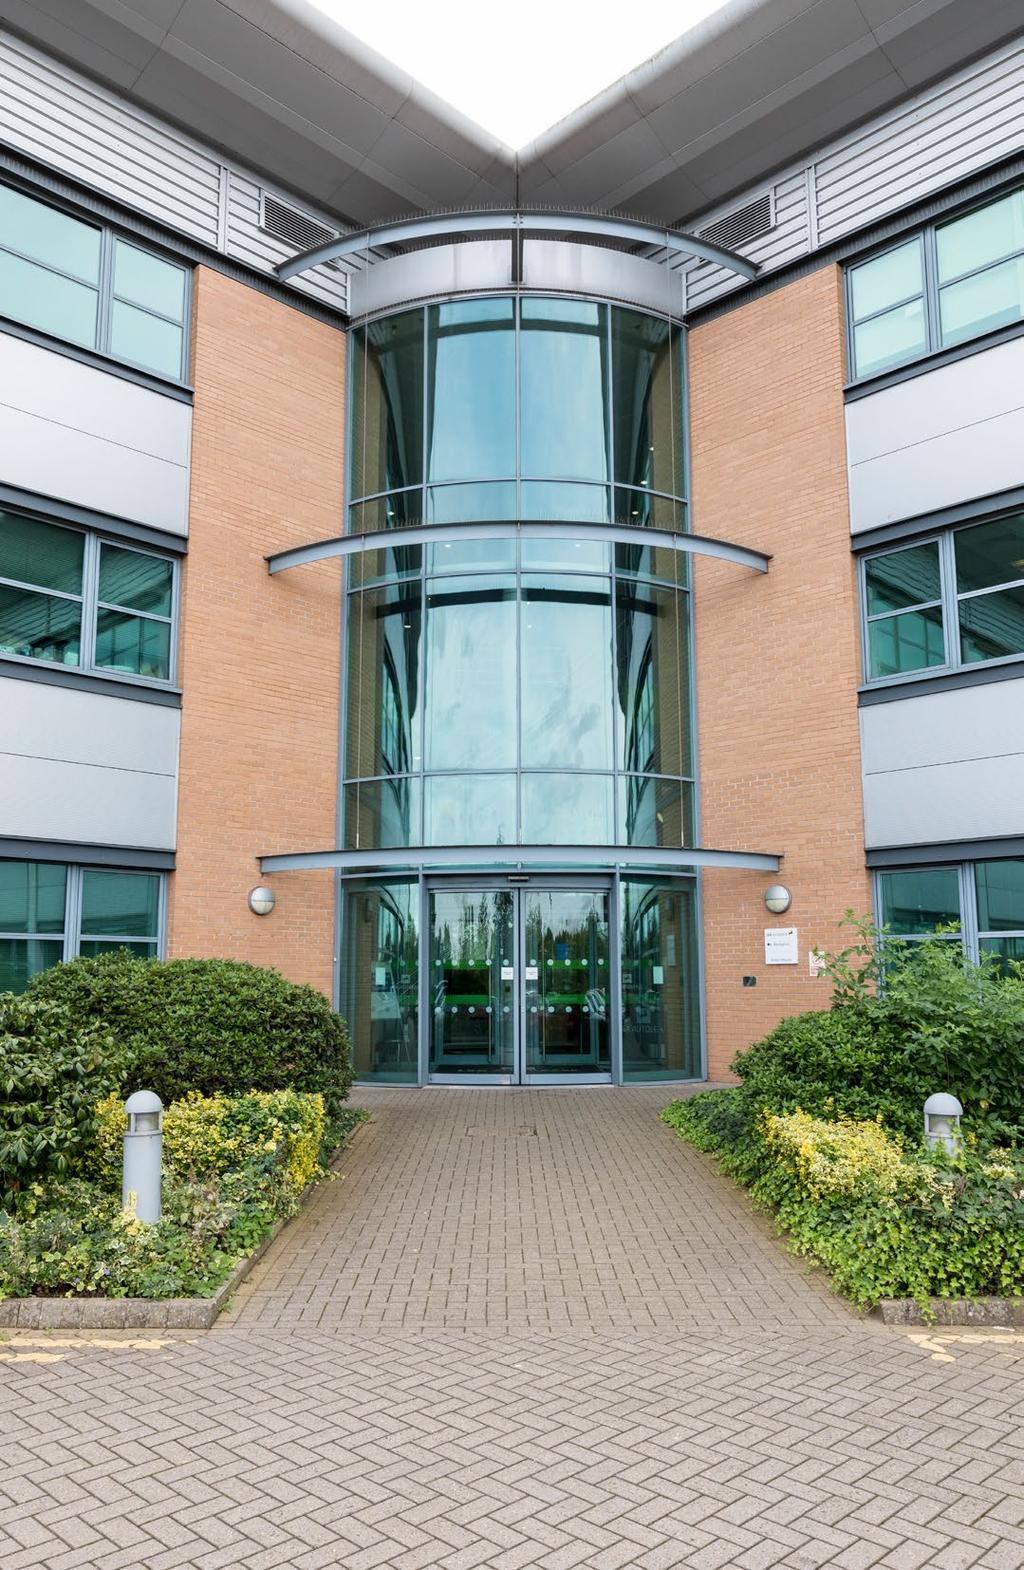 Prime M42 Office Investment Opportunity 05 Description Blake House comprises a modern HQ style detached office building constructed in 1999.